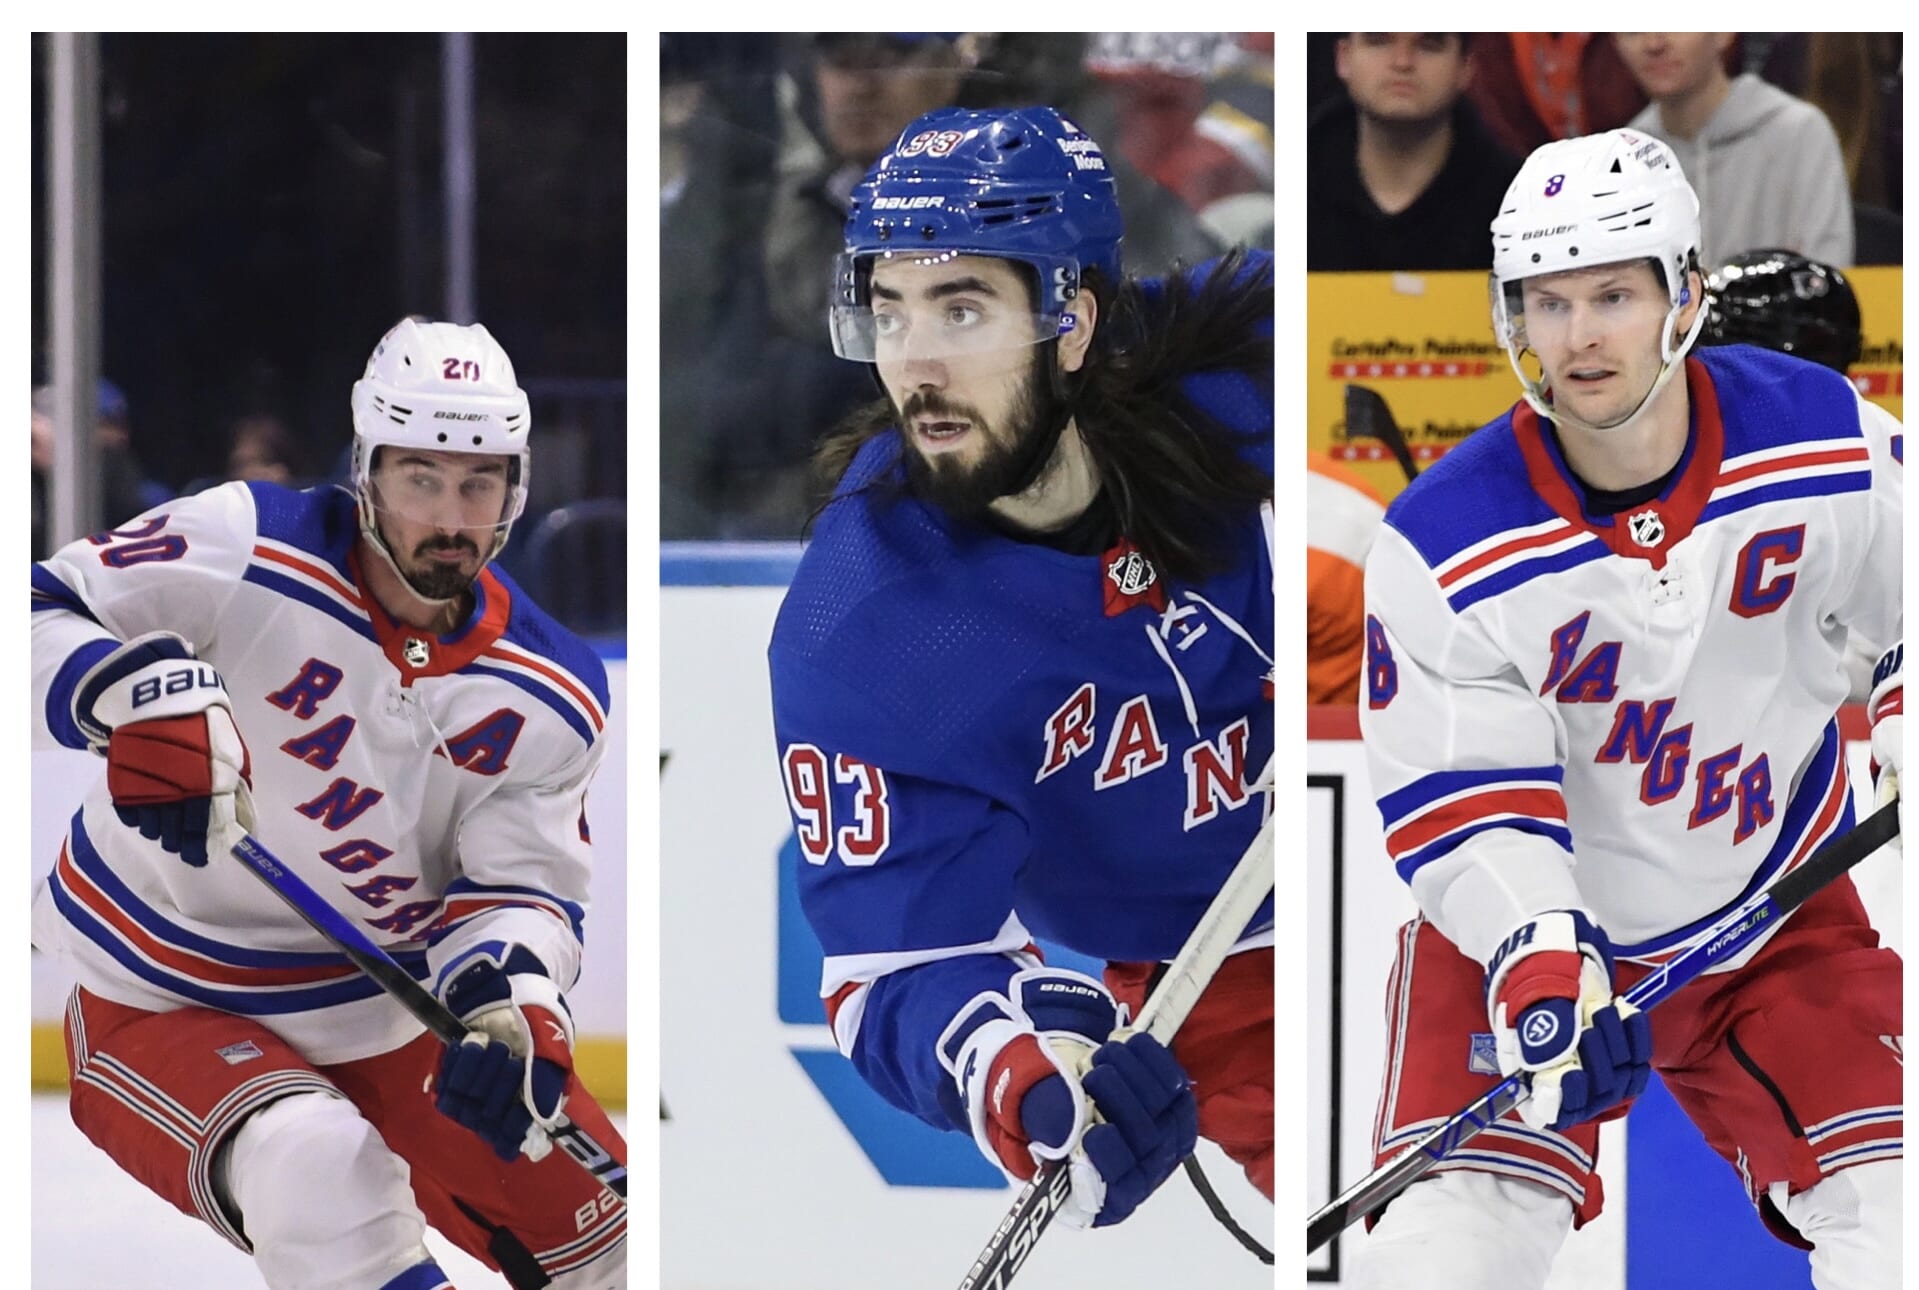 New York Rangers players to participate in Shoulder Check Showcase hockey game